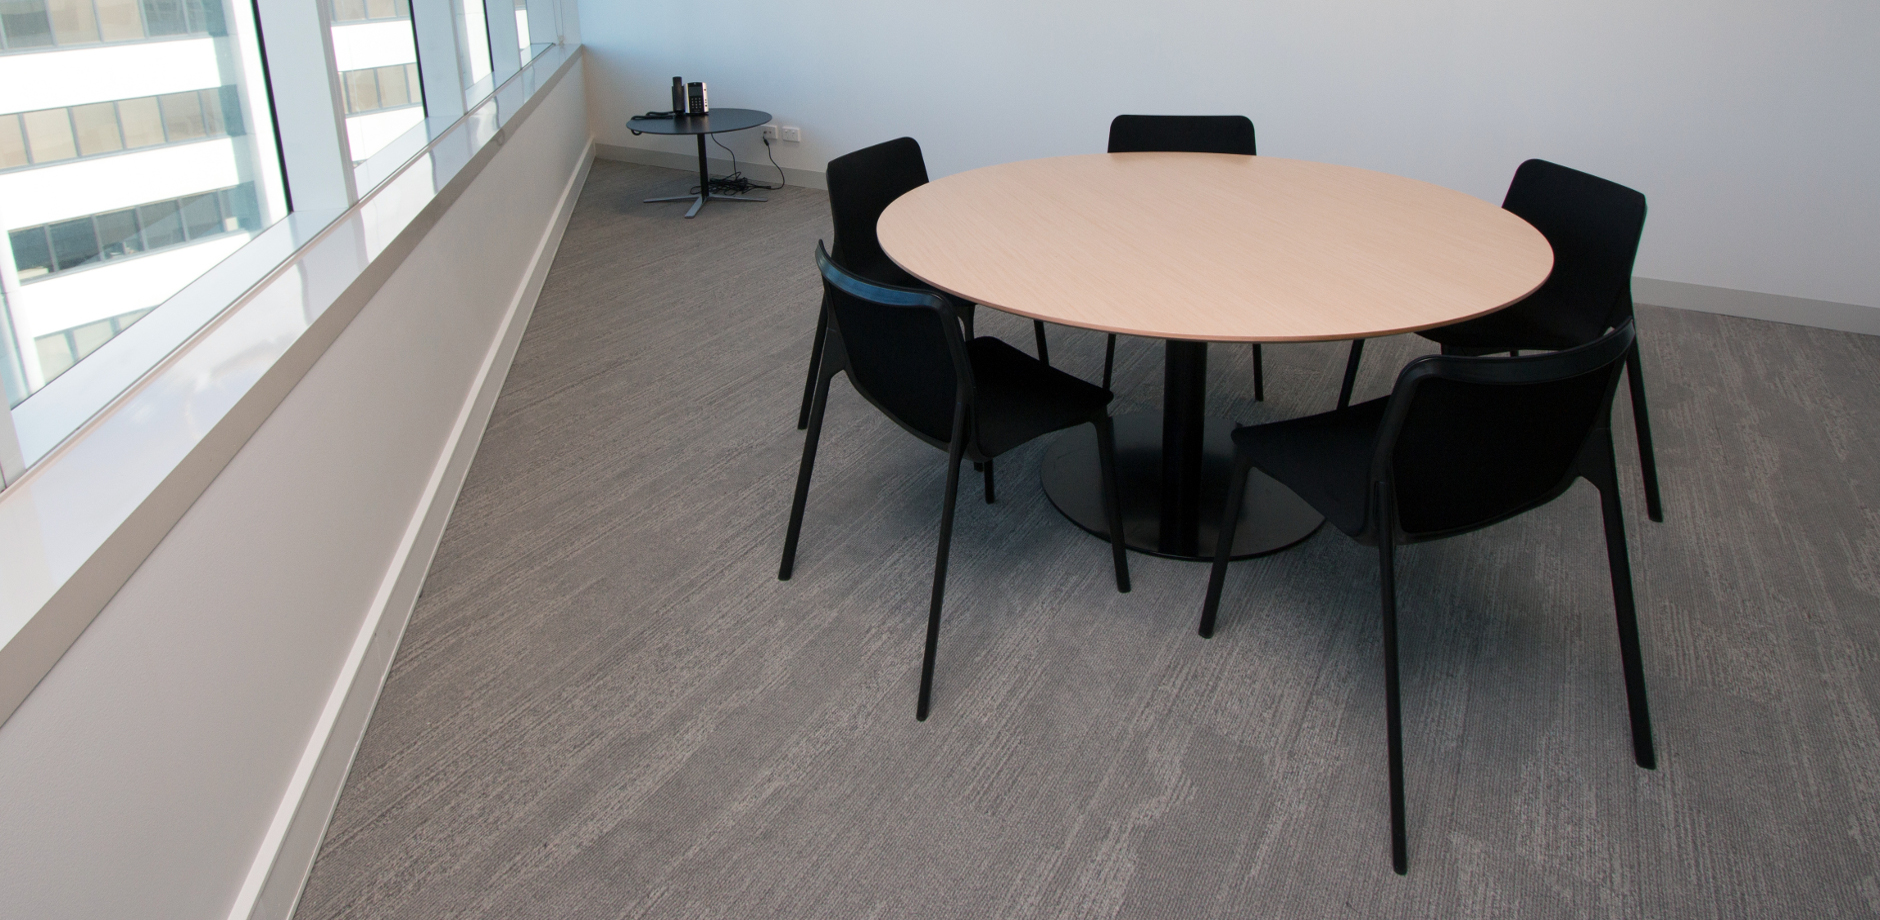 Conference Room - Office Furniture